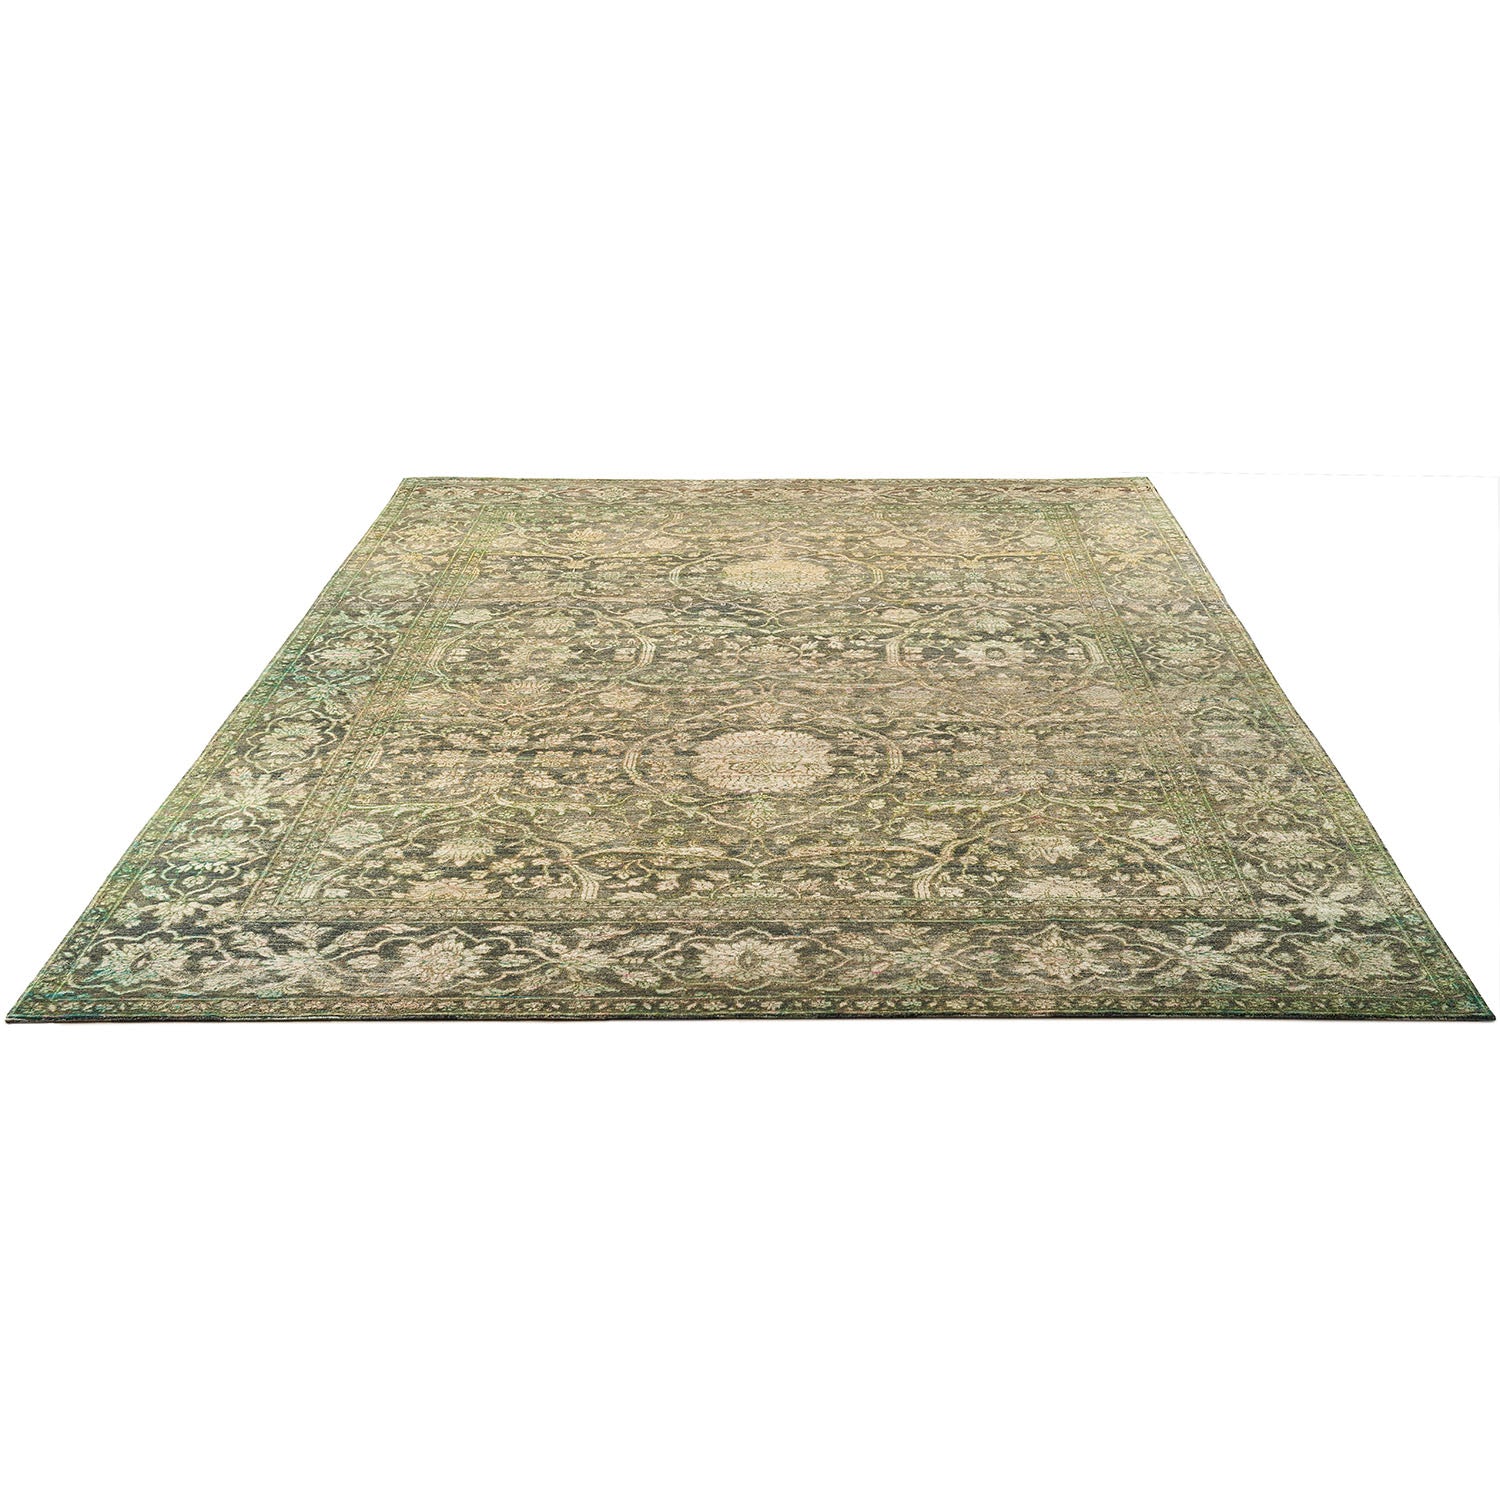 Intricate vintage rectangular rug with symmetrical traditional design and muted colors.